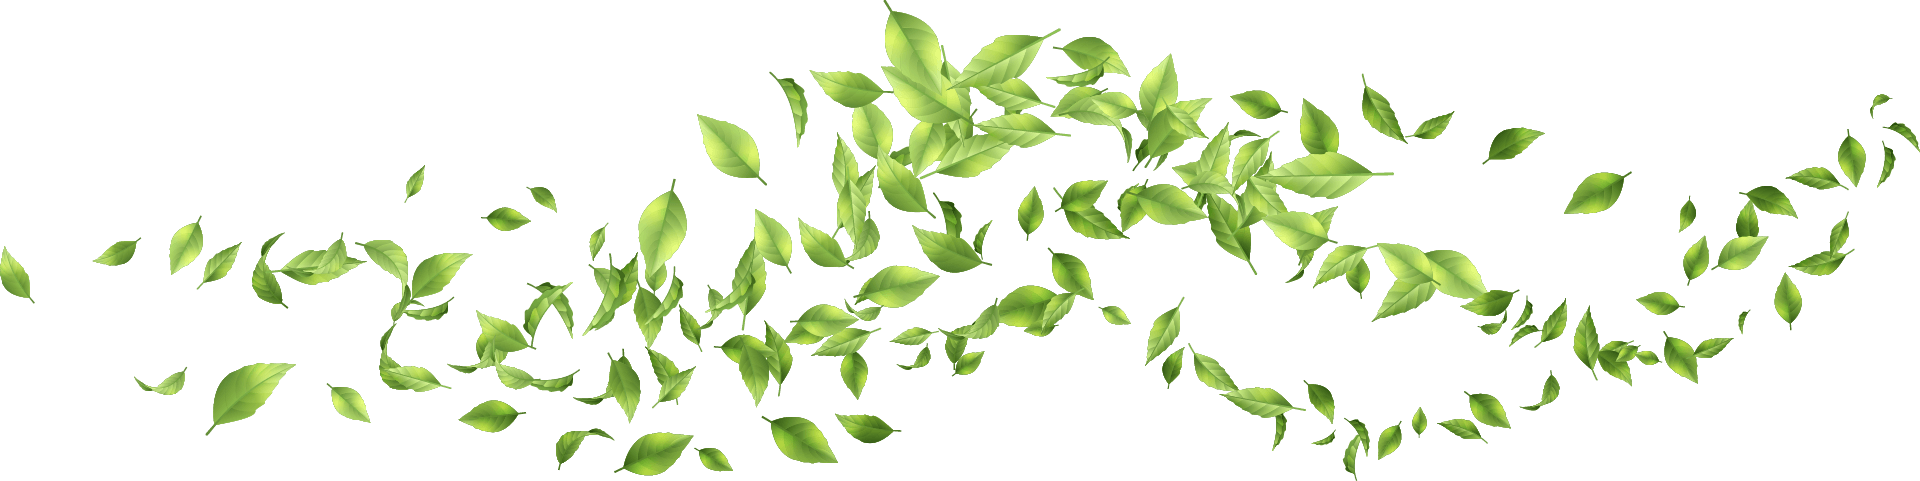 Wave of green leaves graphic